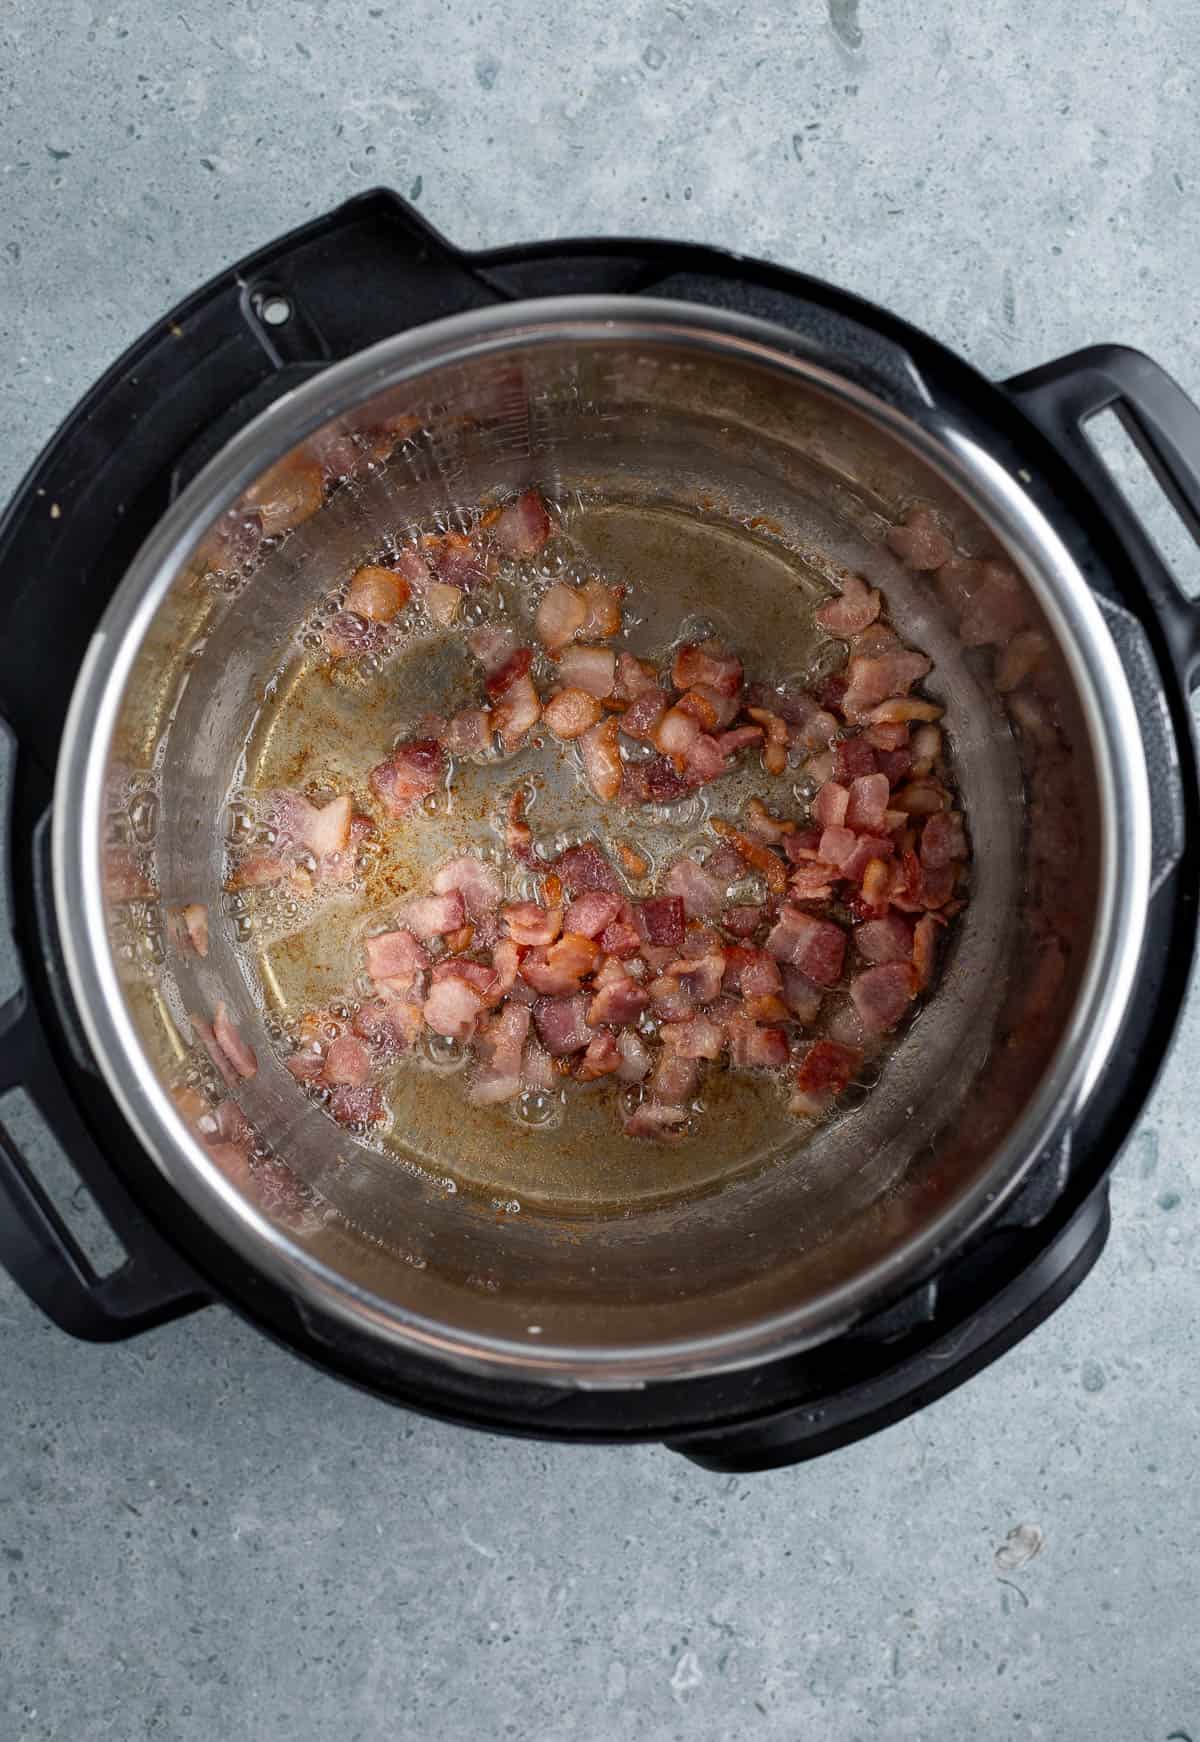 Bacon cooking in an Instant Pot.